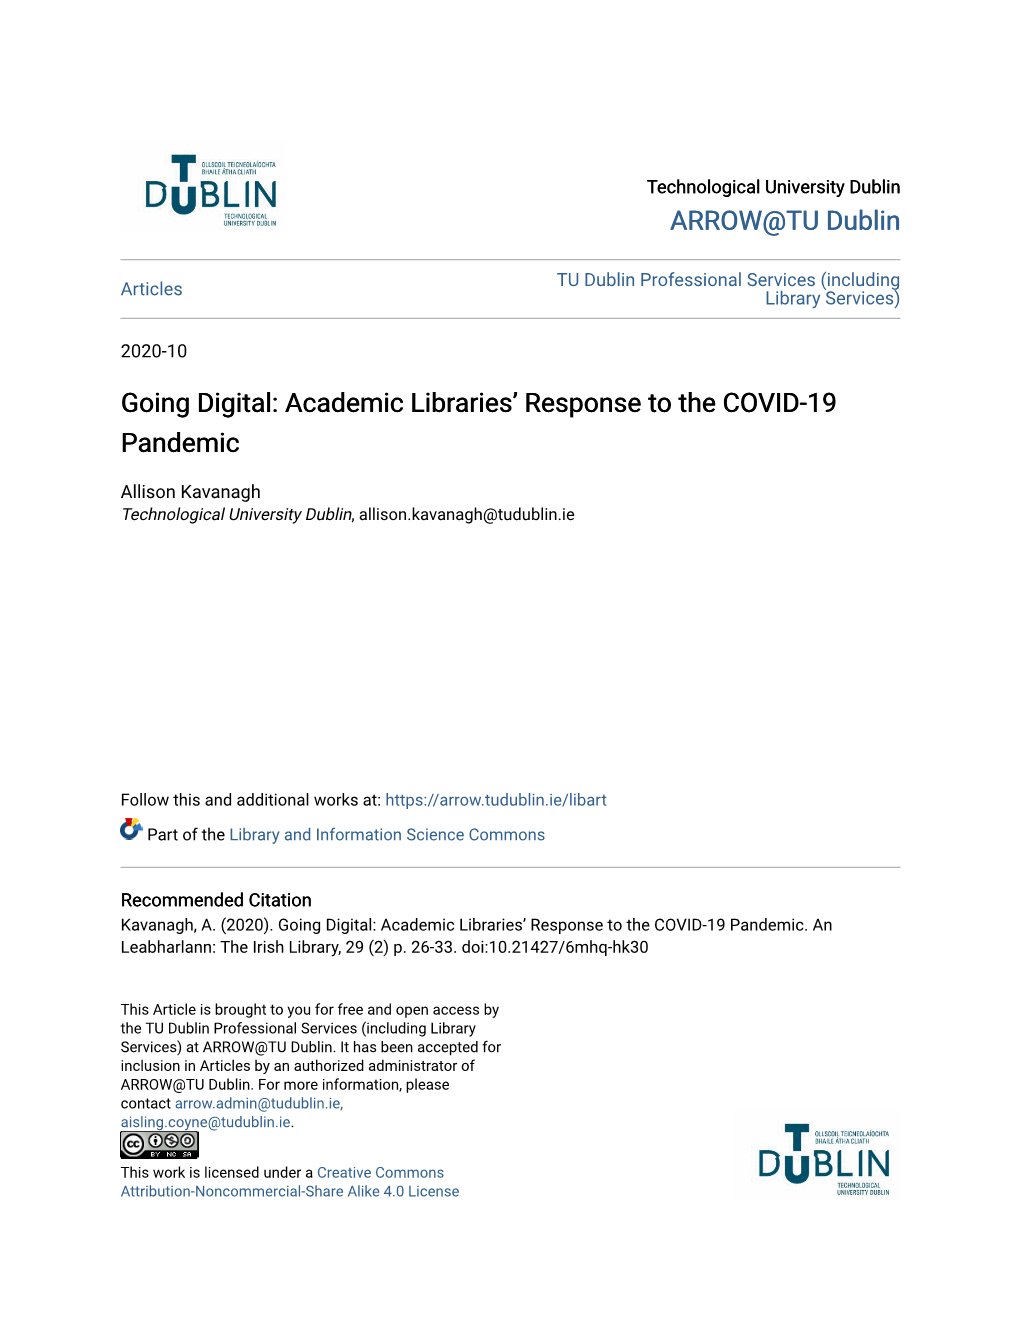 Going Digital: Academic Librariesâ•Ž Response to the COVID-19 Pandemic